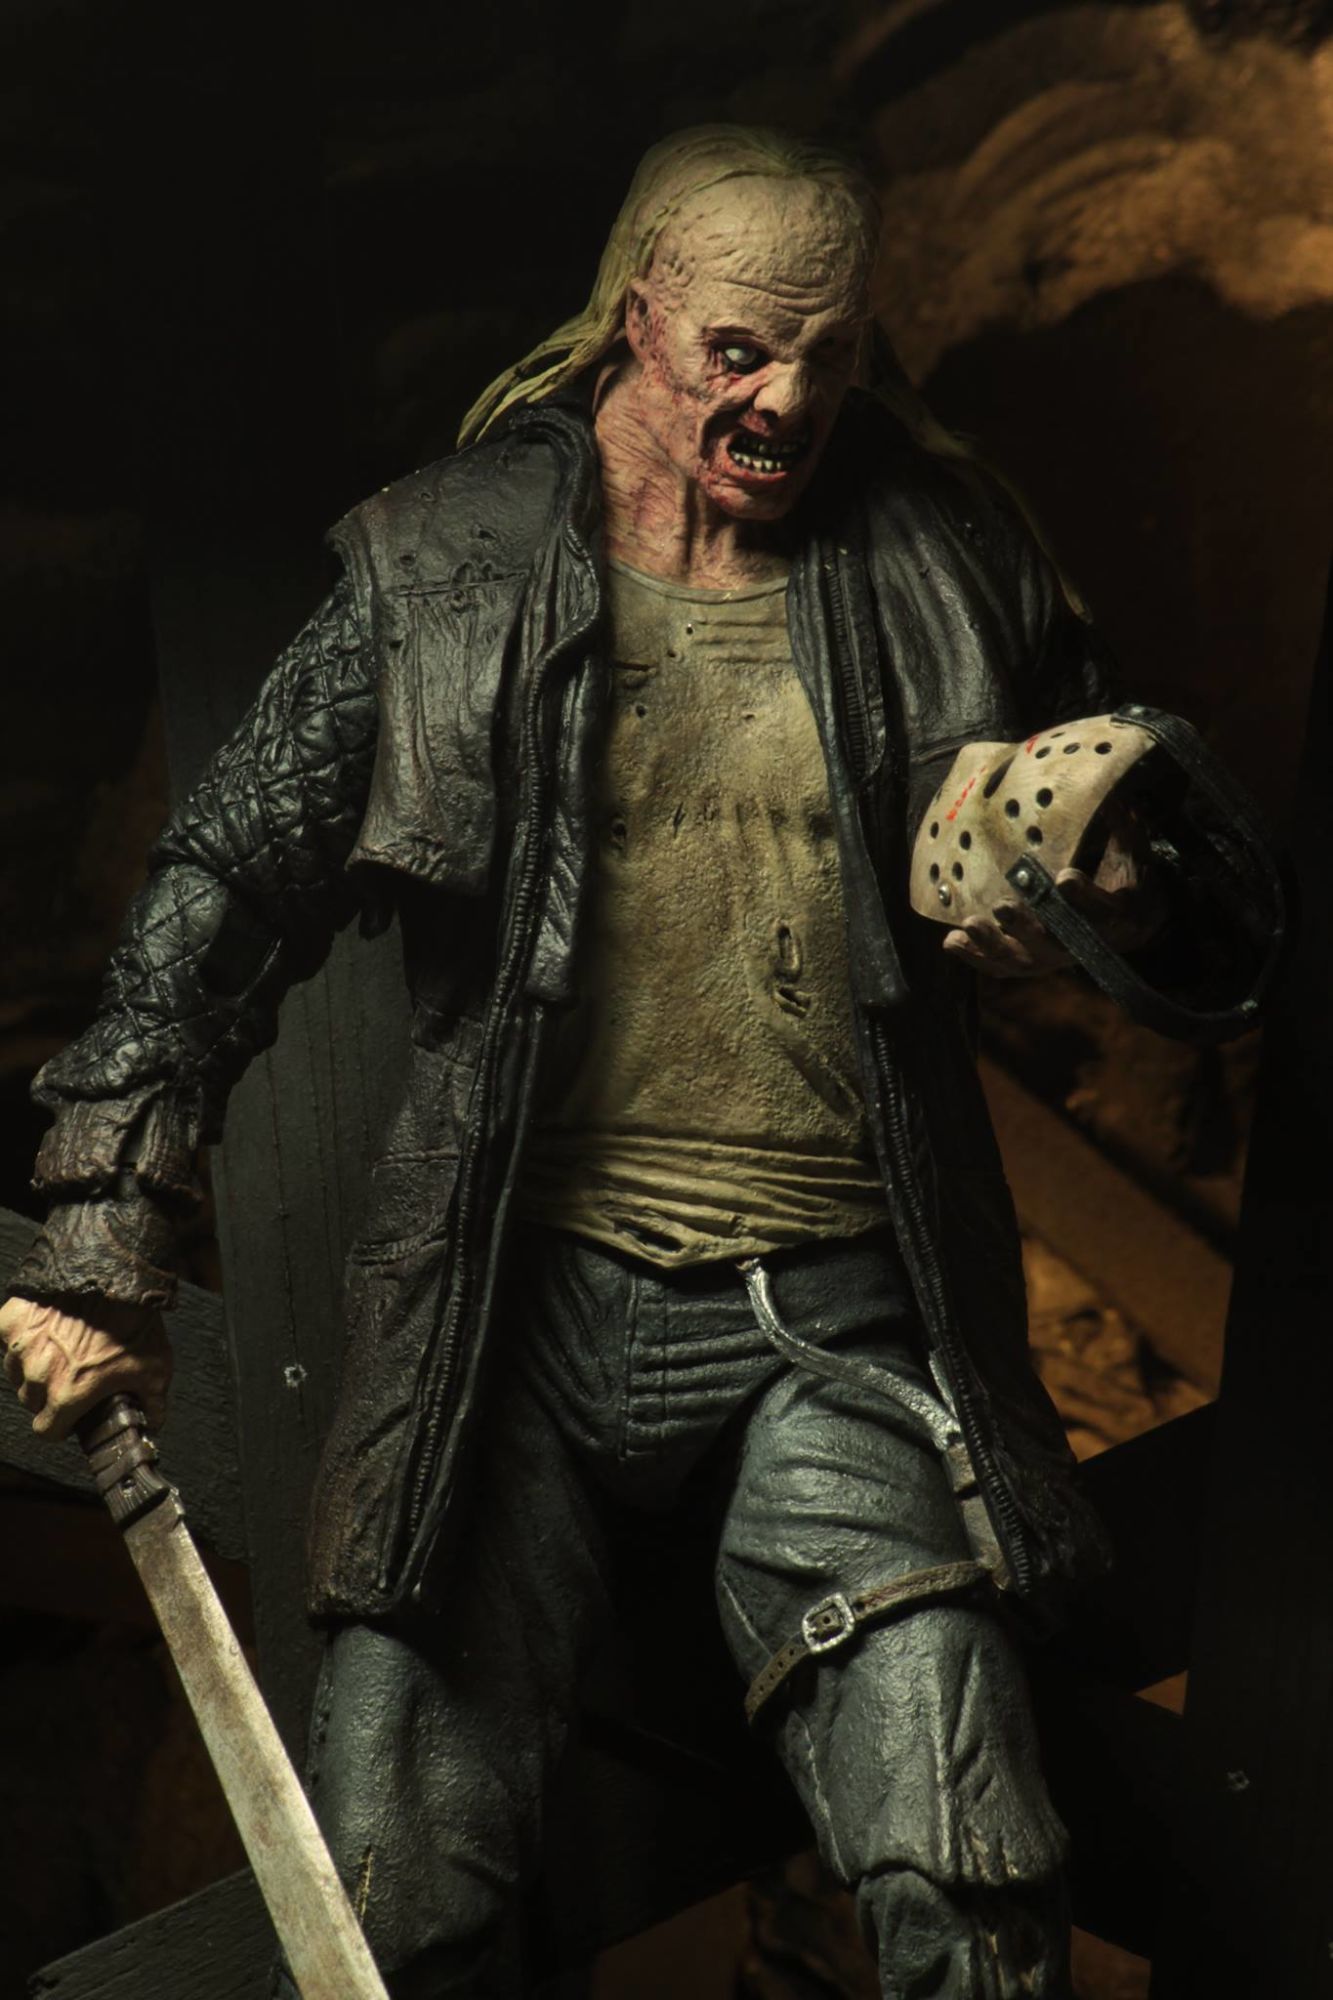 https://bleedingcool.com/collectibles/neca-horror-halloween-laurie-strode-jason-freddy/attachment/friday-the-13th-2009-ultimate-jason-6/